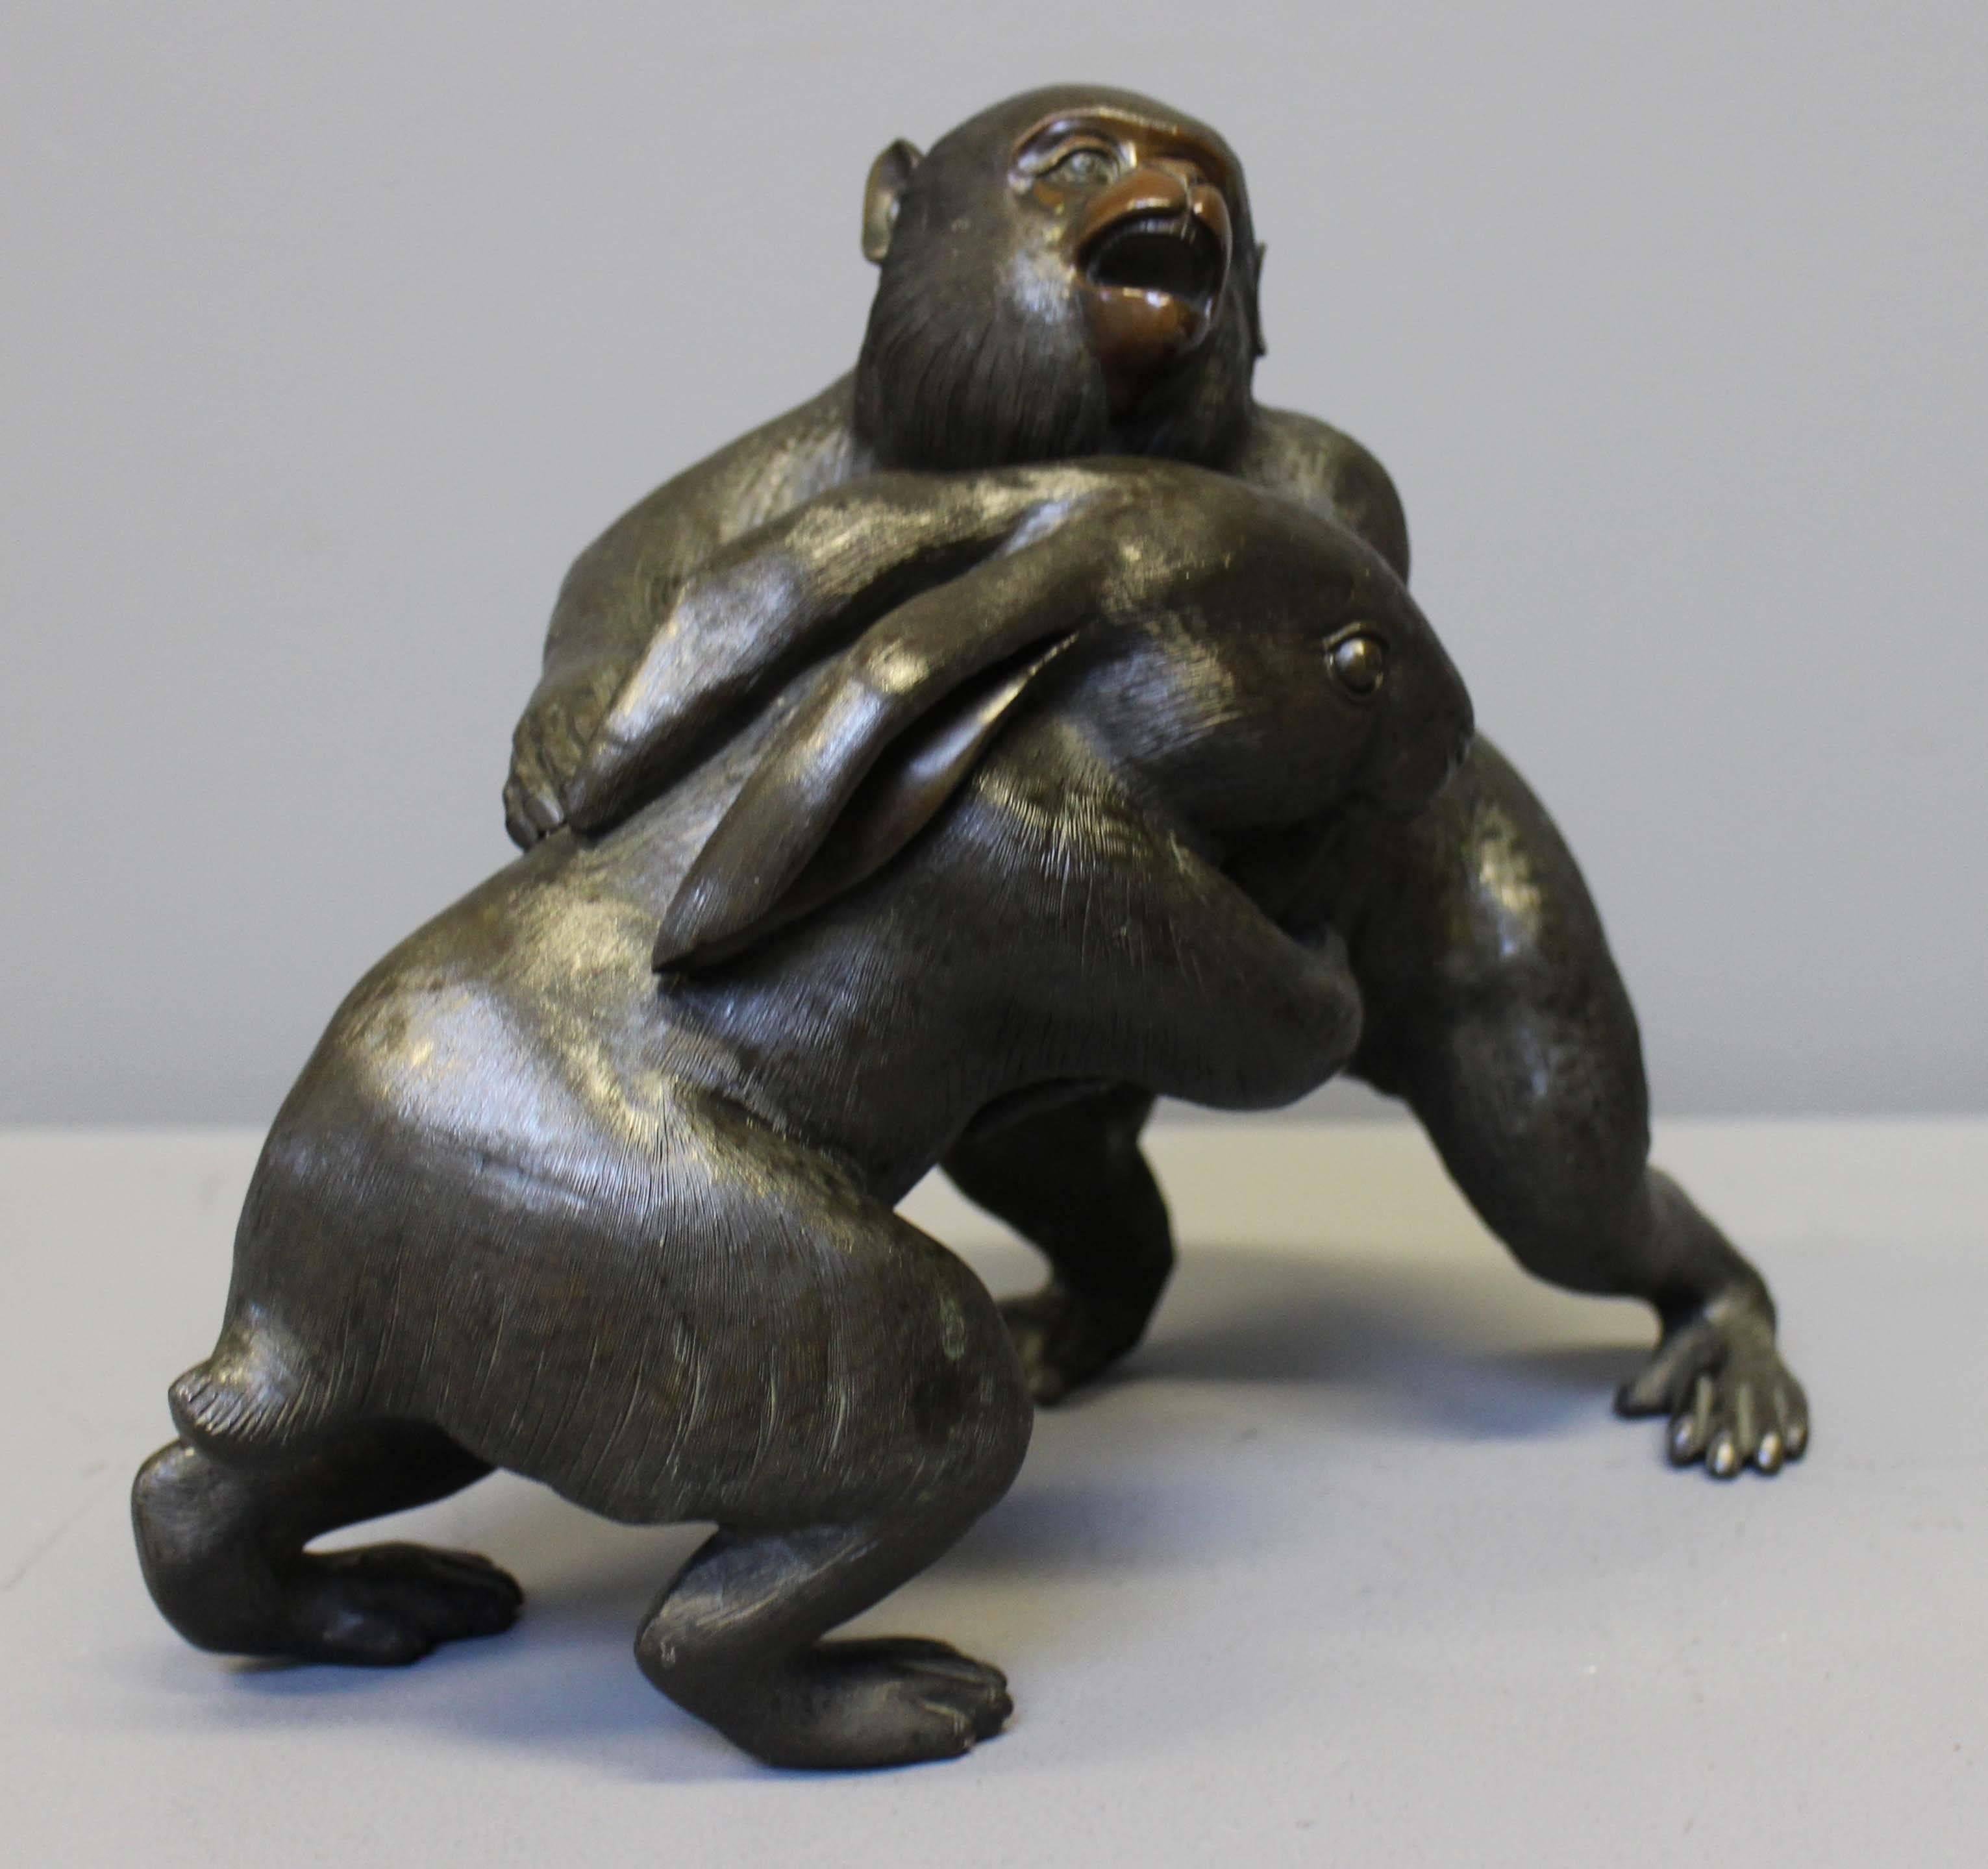 An amusing antique Japanese bronze of a Monkey and a Rabbit wrestling. The subject seems to have been inspired by the 12th century Chōjū-jinbutsu-giga scrolls of Kyoto. The scrolls depict anthropomorphic animals taking part in a ceremony and